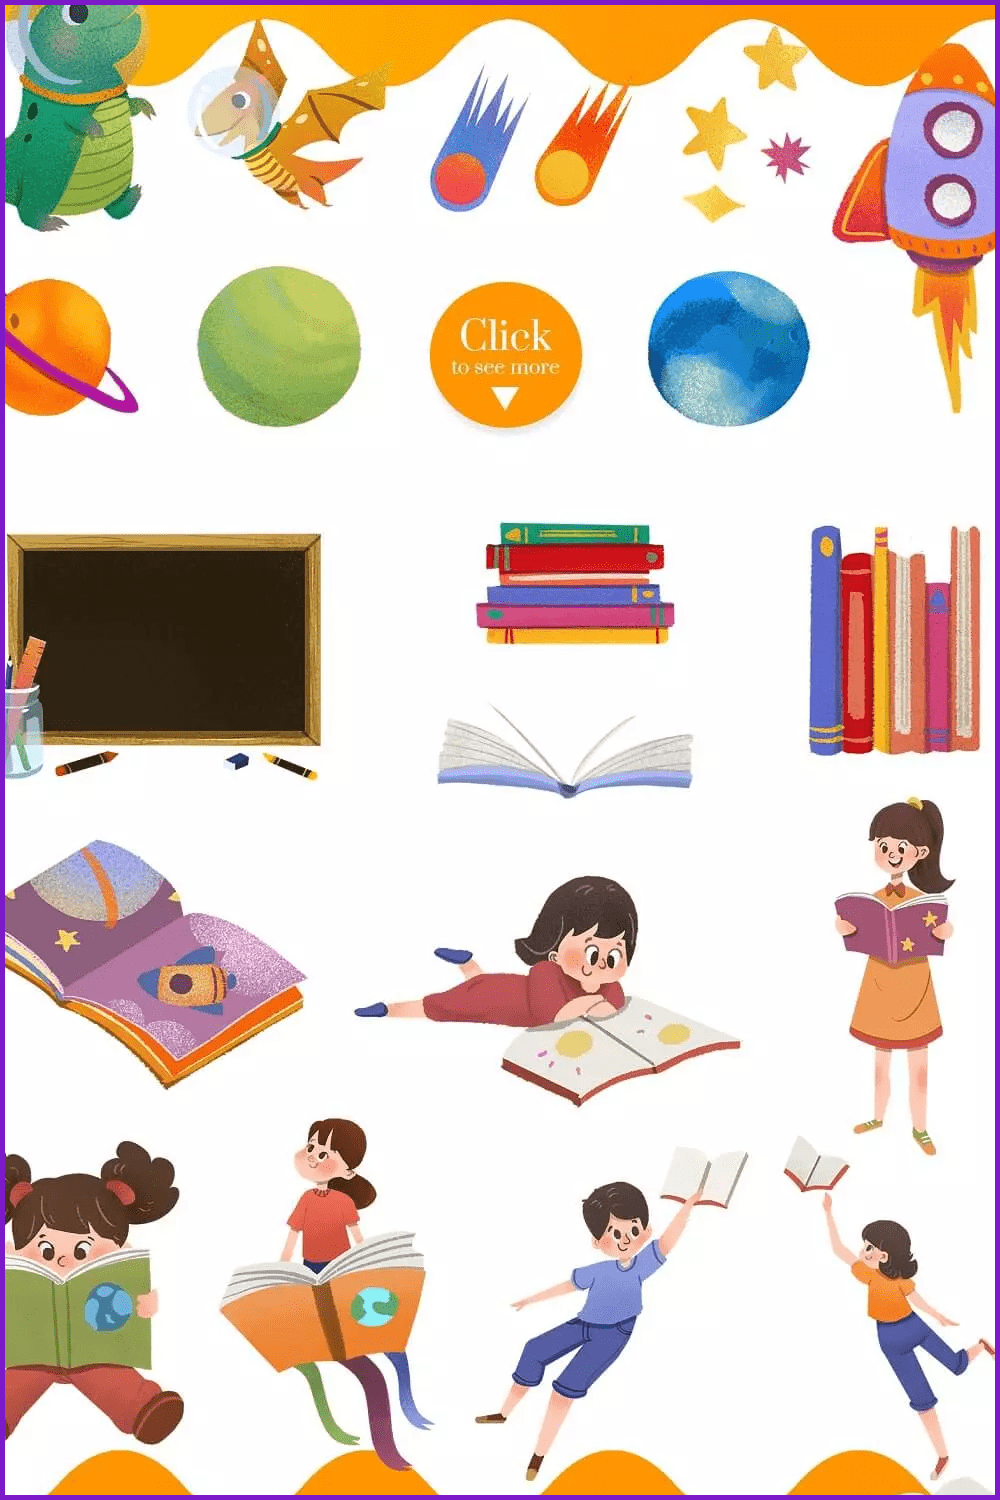 Collage of images of children with books.